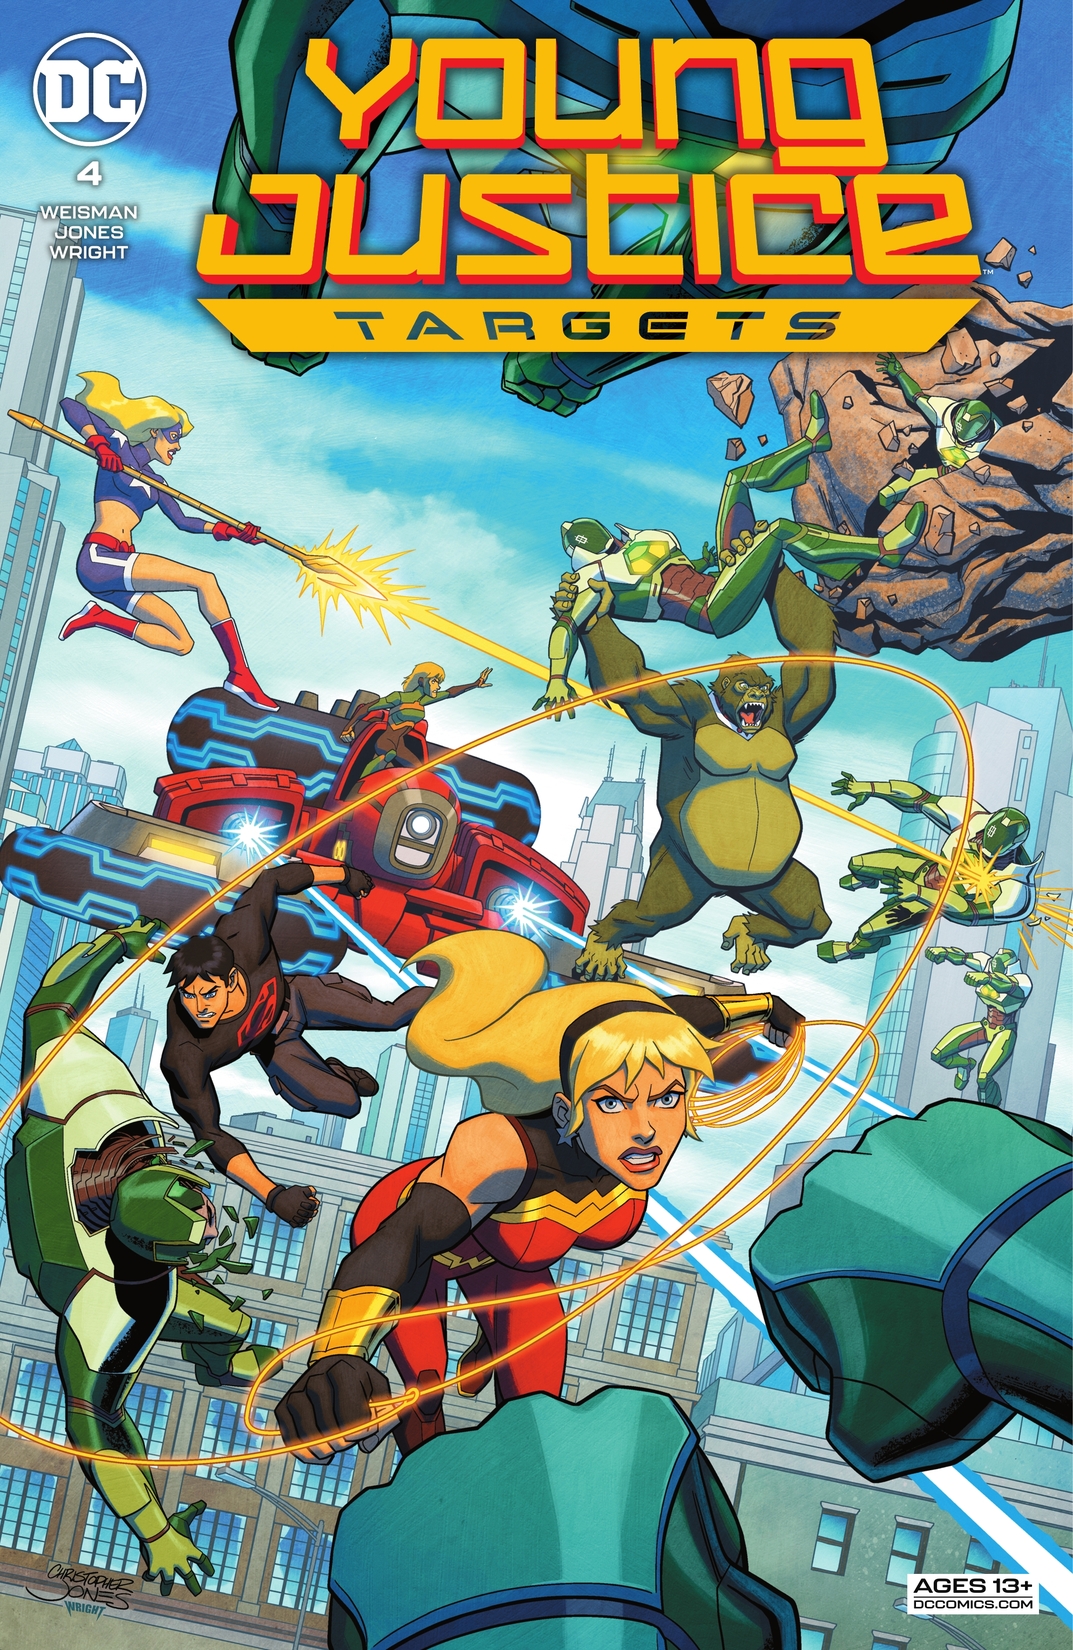 Young Justice: Targets Director's Cut #4 preview images